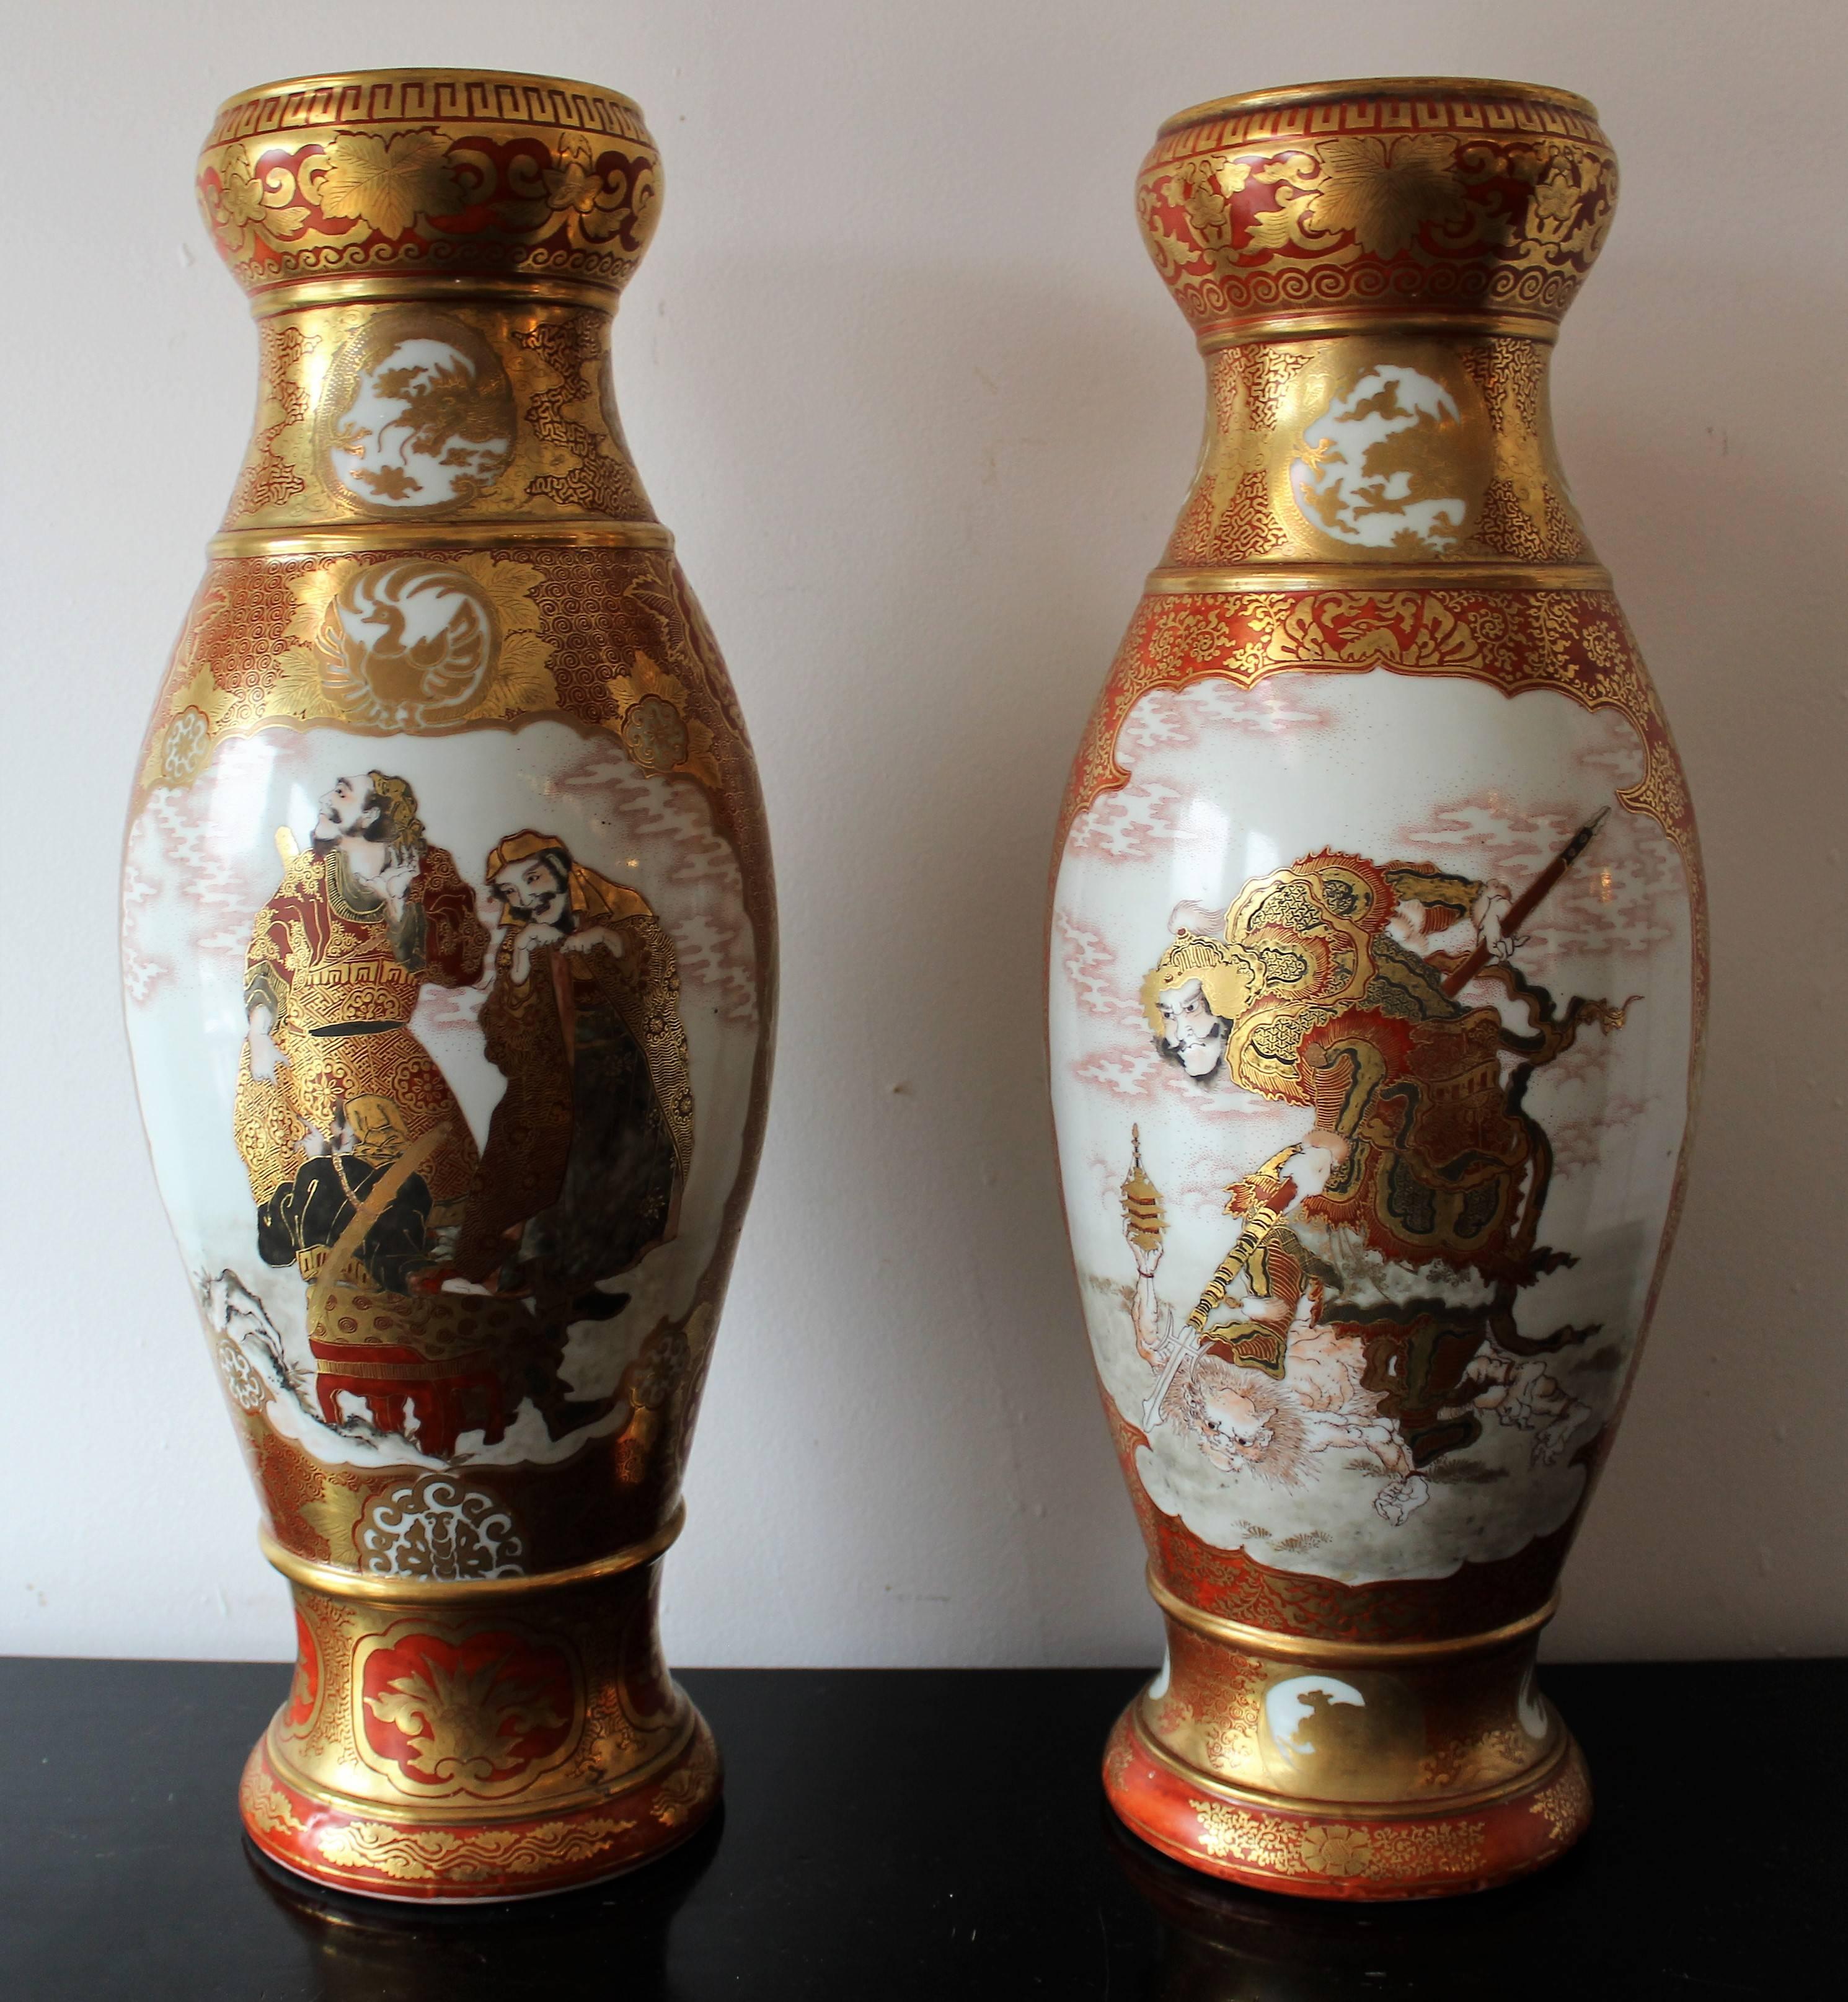 Pair of Japanese Meiji period Kutani porcelain vase's finely decorated in over glaze rust-red and polychrome enamels with scrolling gilt designs of foliate, dragons, animals and mythical creatures throughout. Each vase features two cartouches with